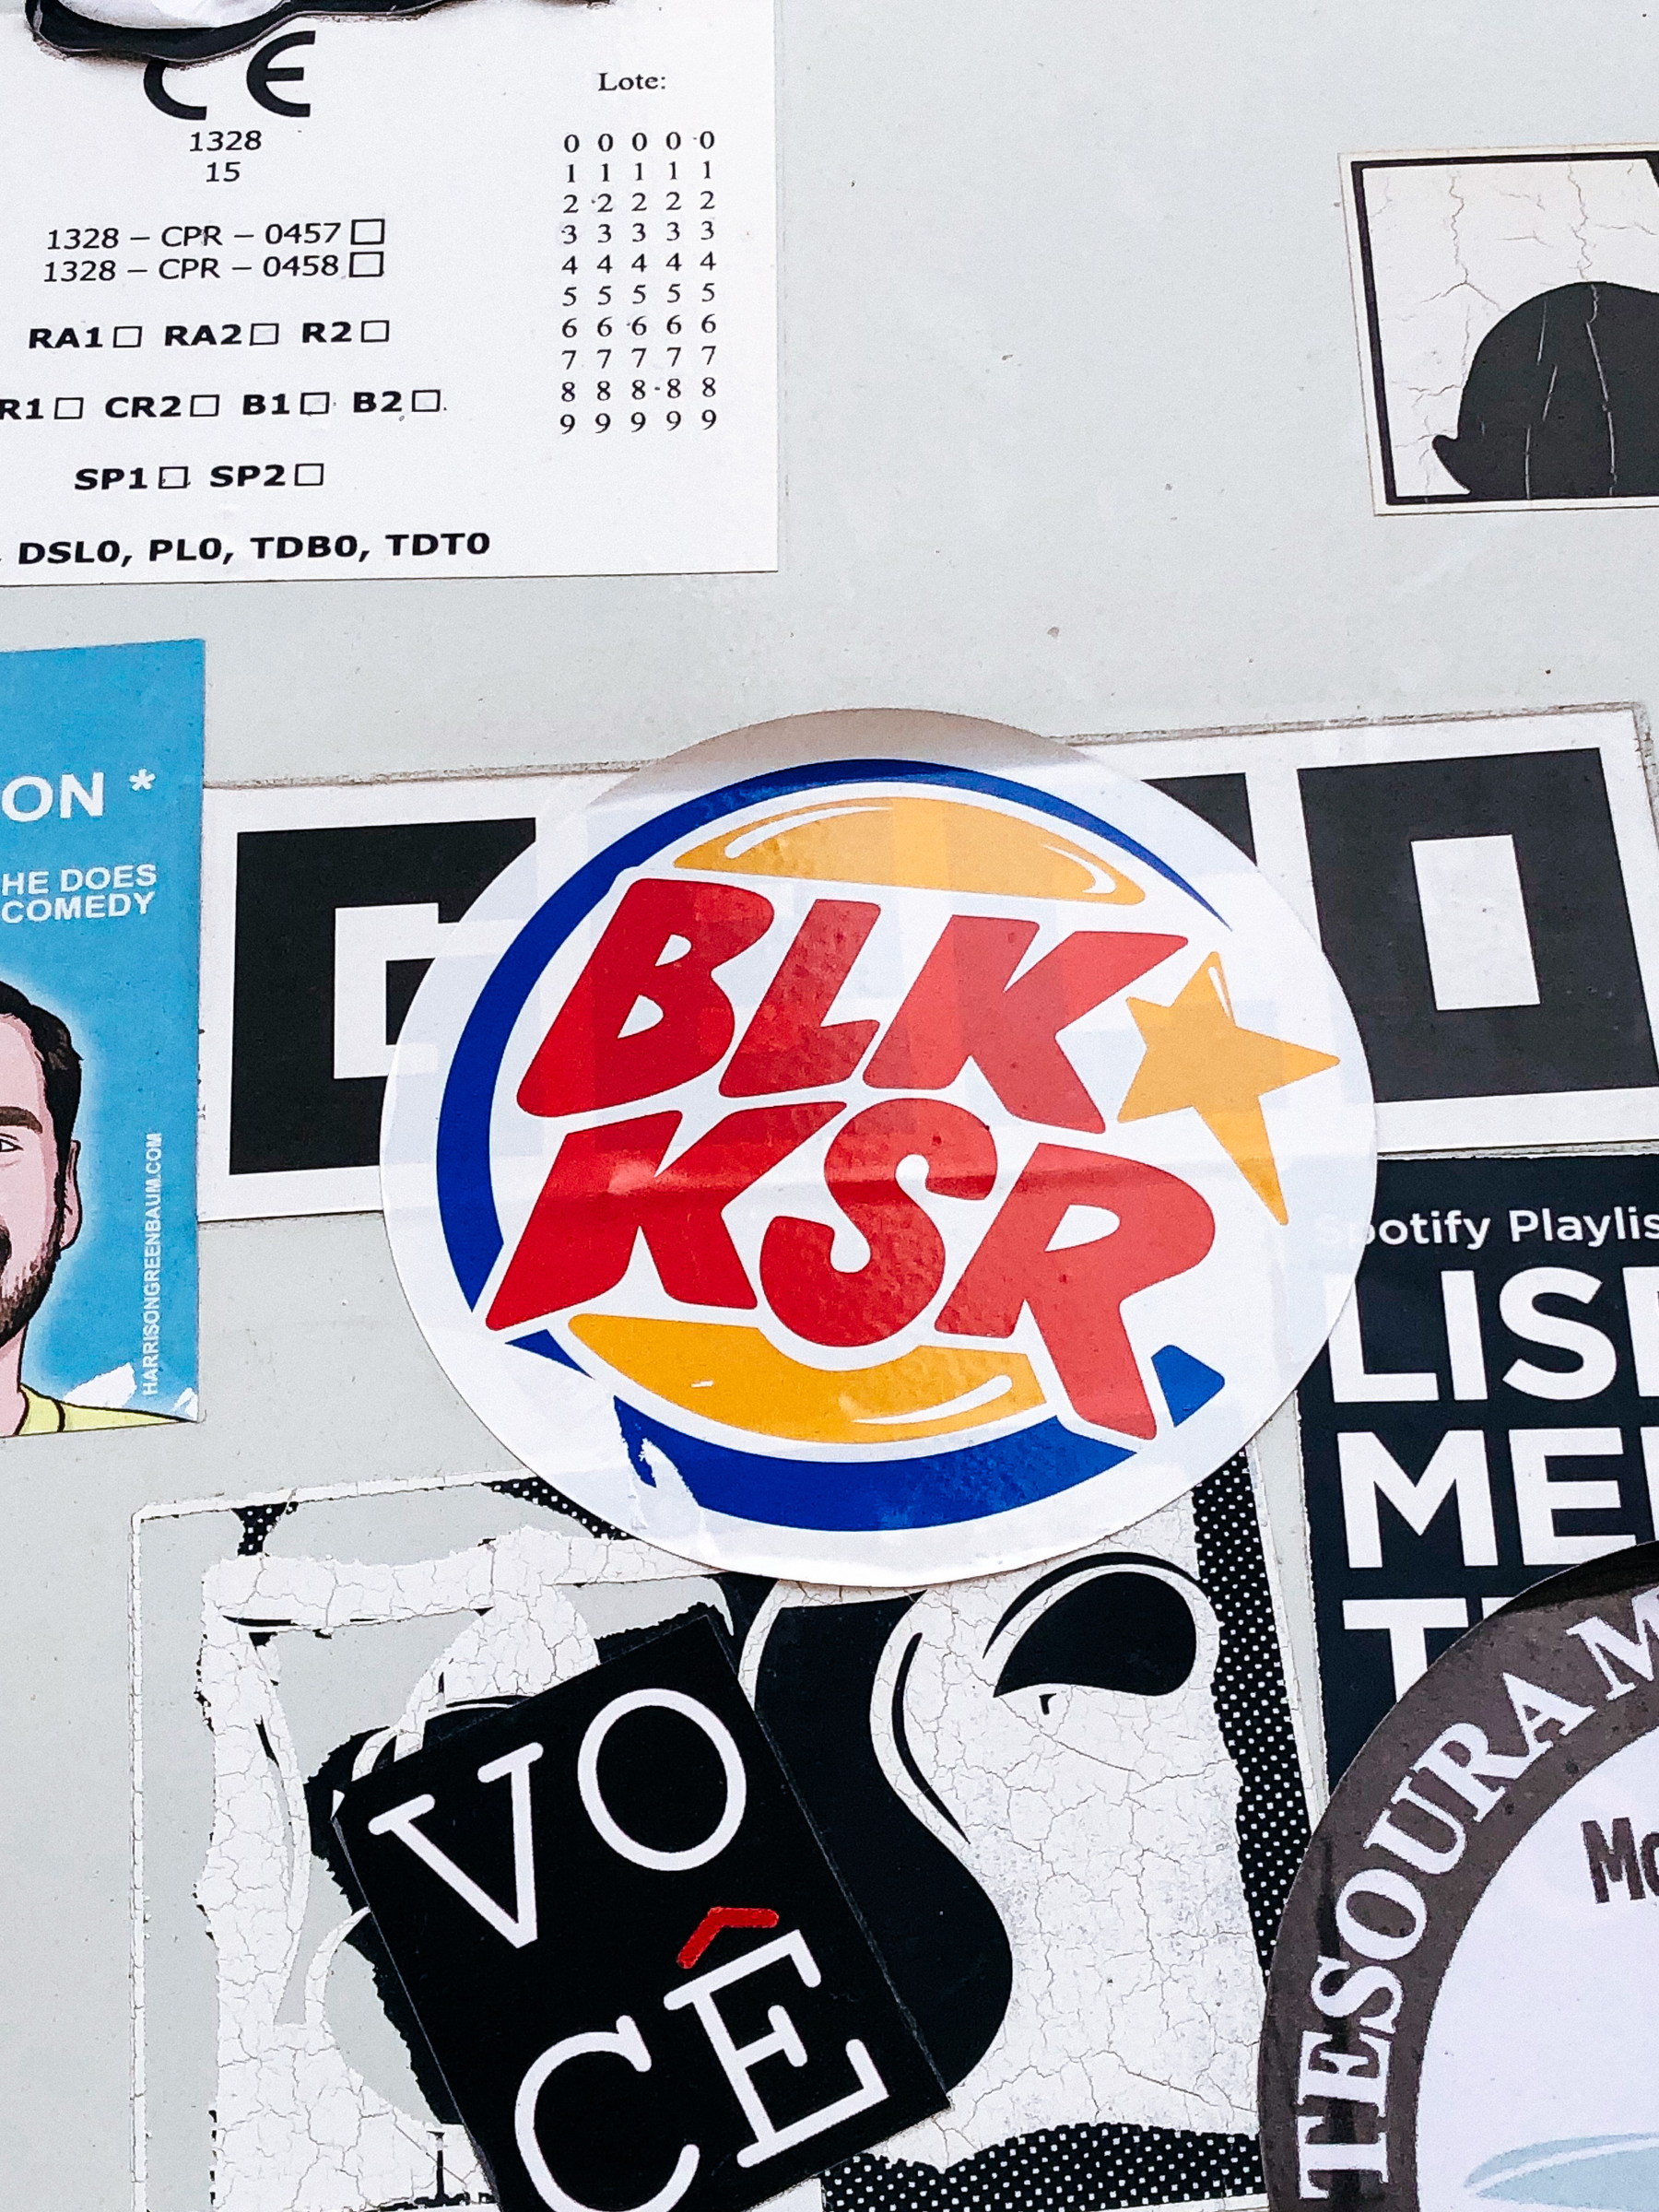 Sticker mimicking the Burger King logo, with “BLK KSR” replacing the brand’s words. 